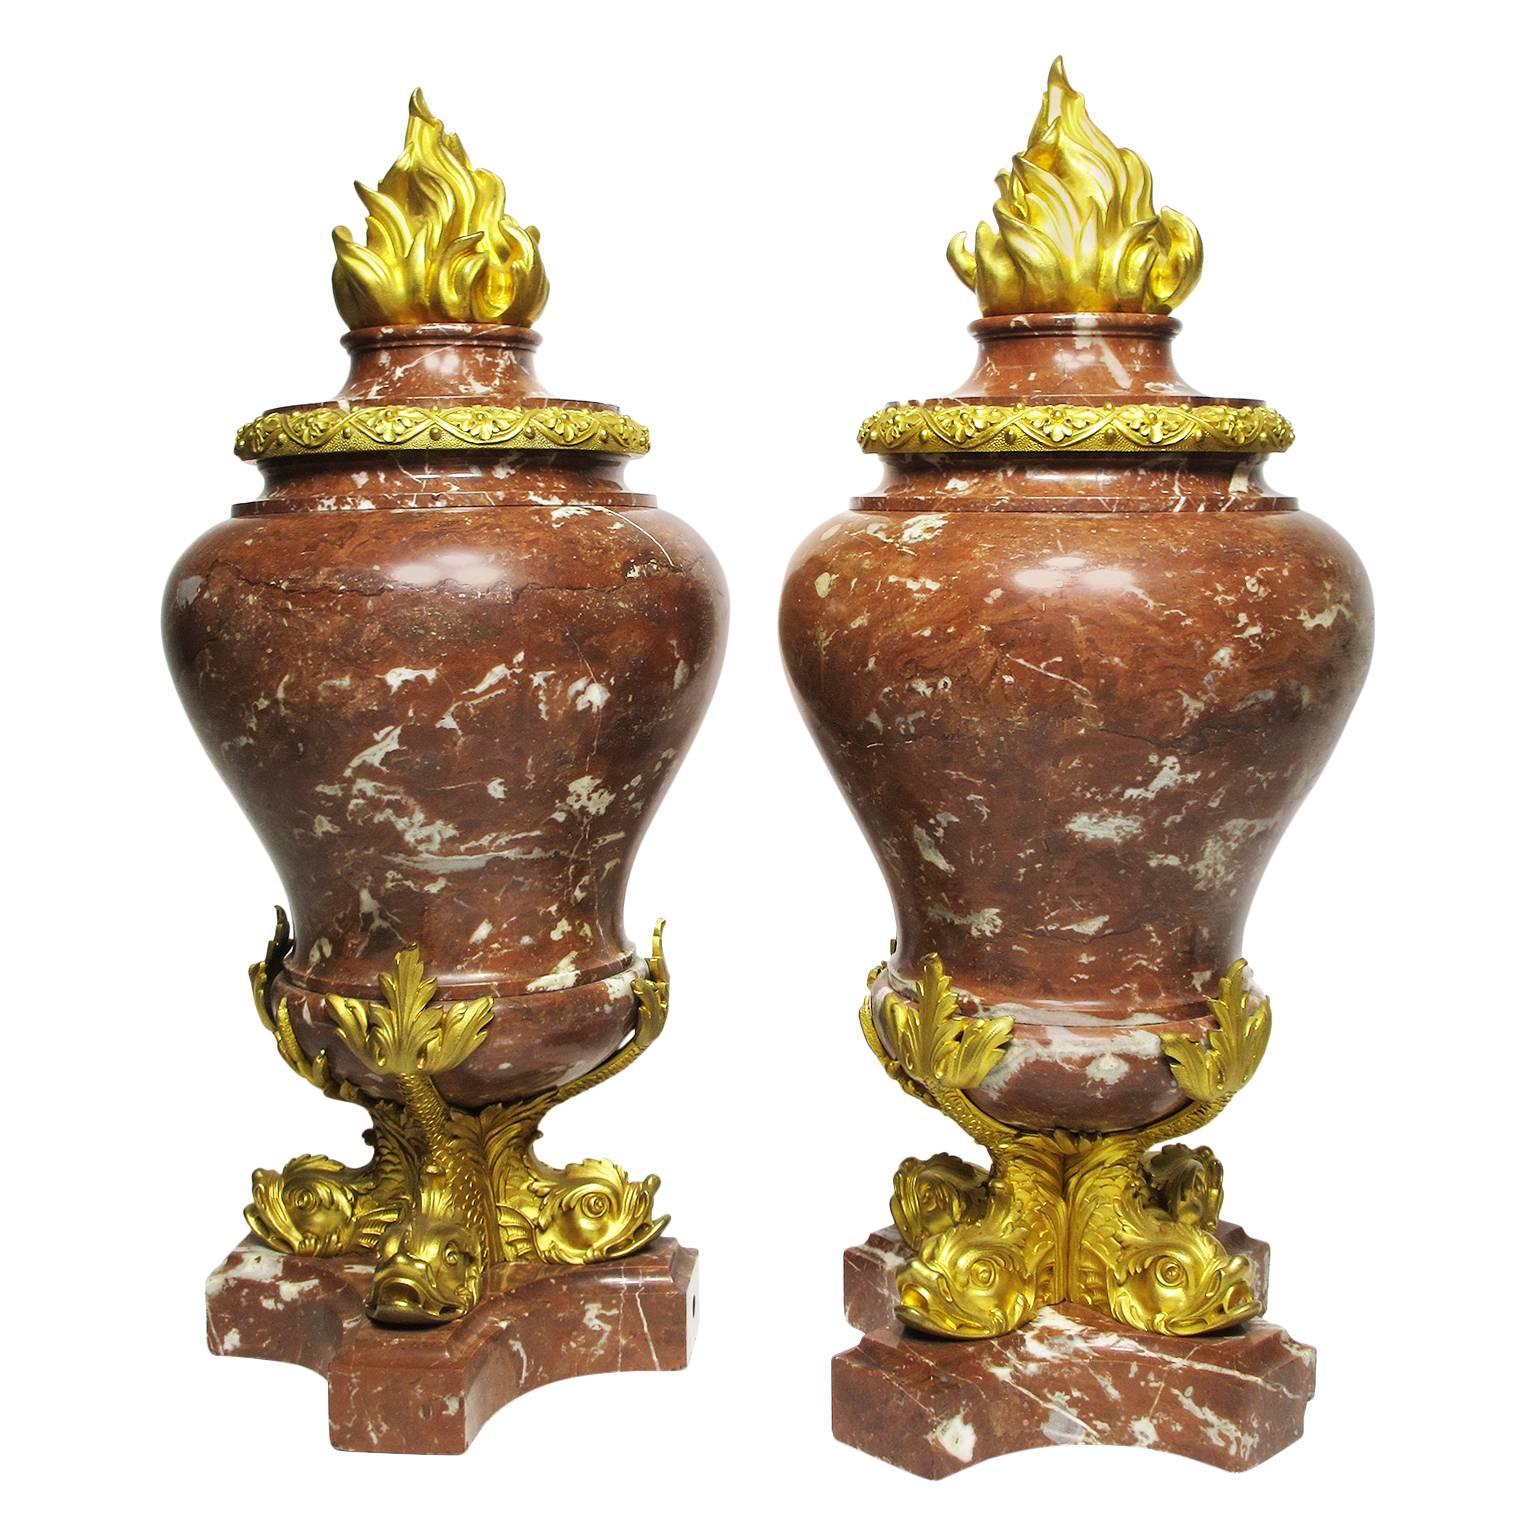 Fine Pair of French 19th Century Marble and Gilt Bronze-Mounted Flambeaux Urns